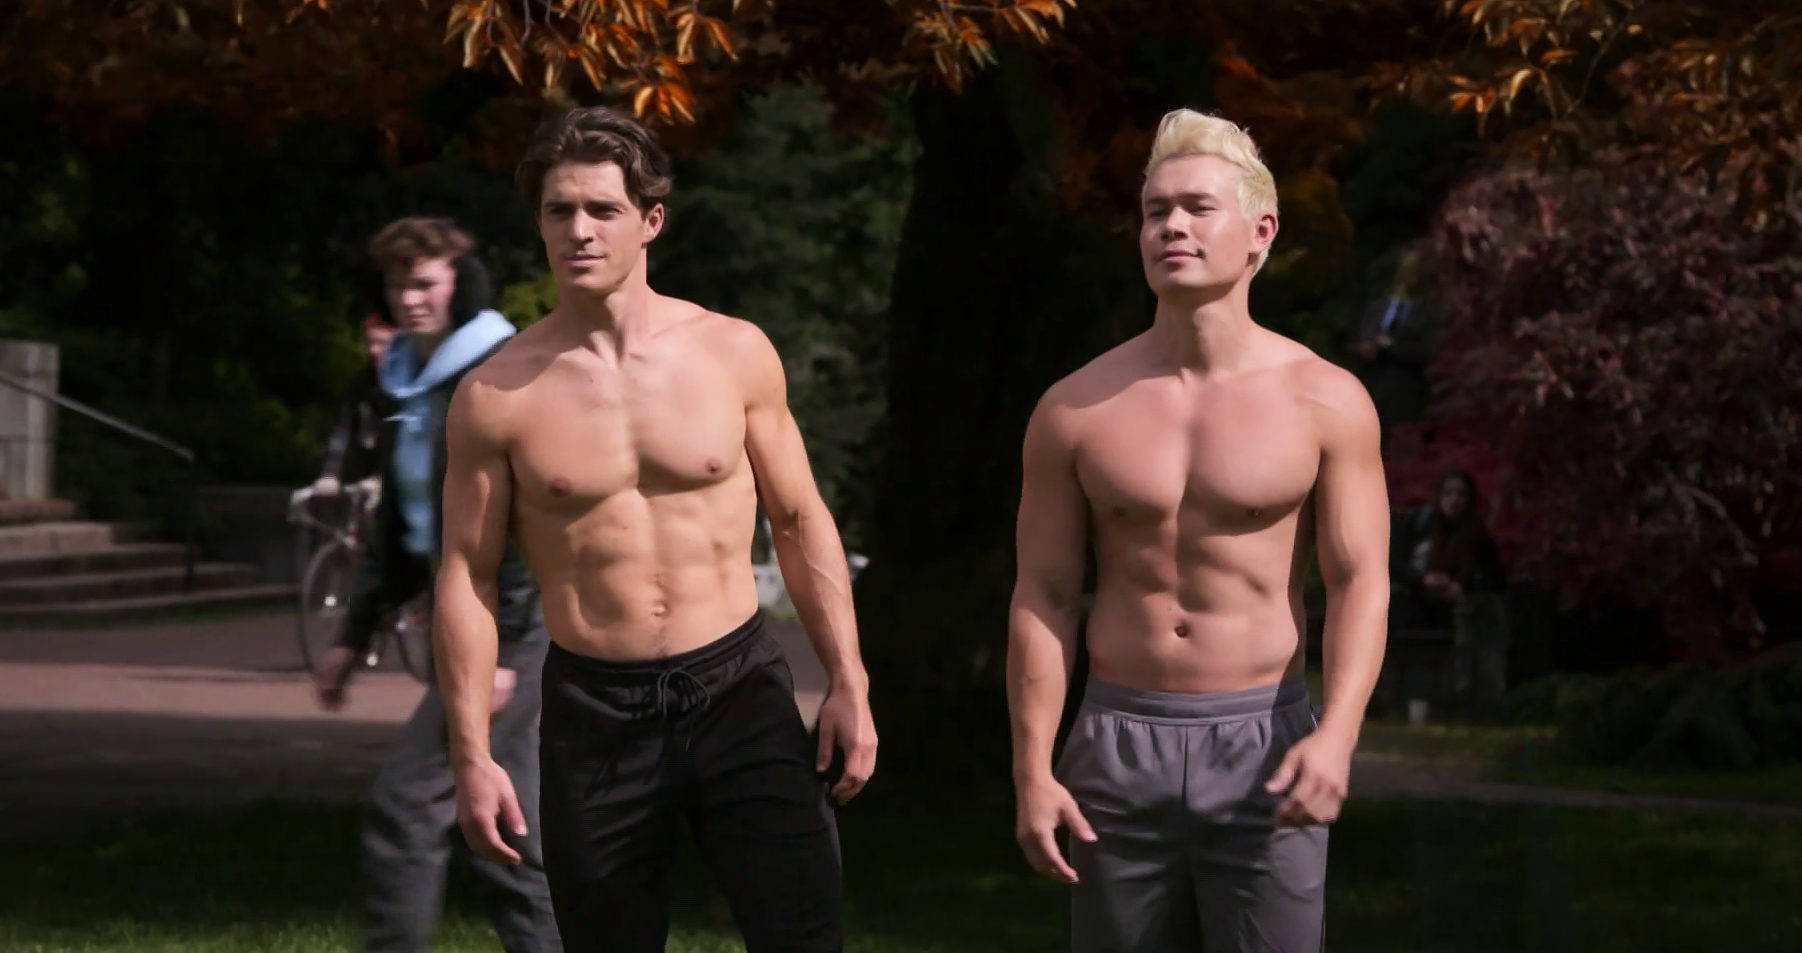 Check out Spencer Neville shirtless promo pics for ‘The Sex Lives of College Girls’